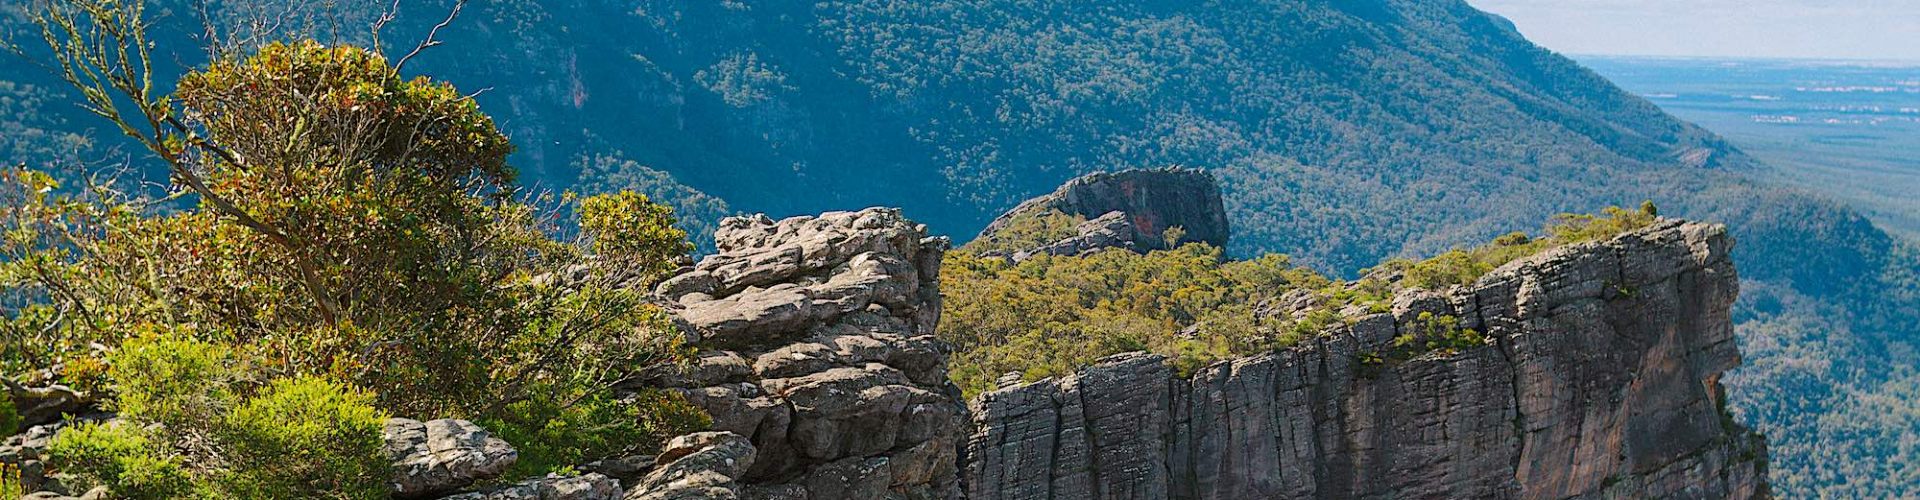 Top 10 Things to Do in the Grampians, VIC inner banner